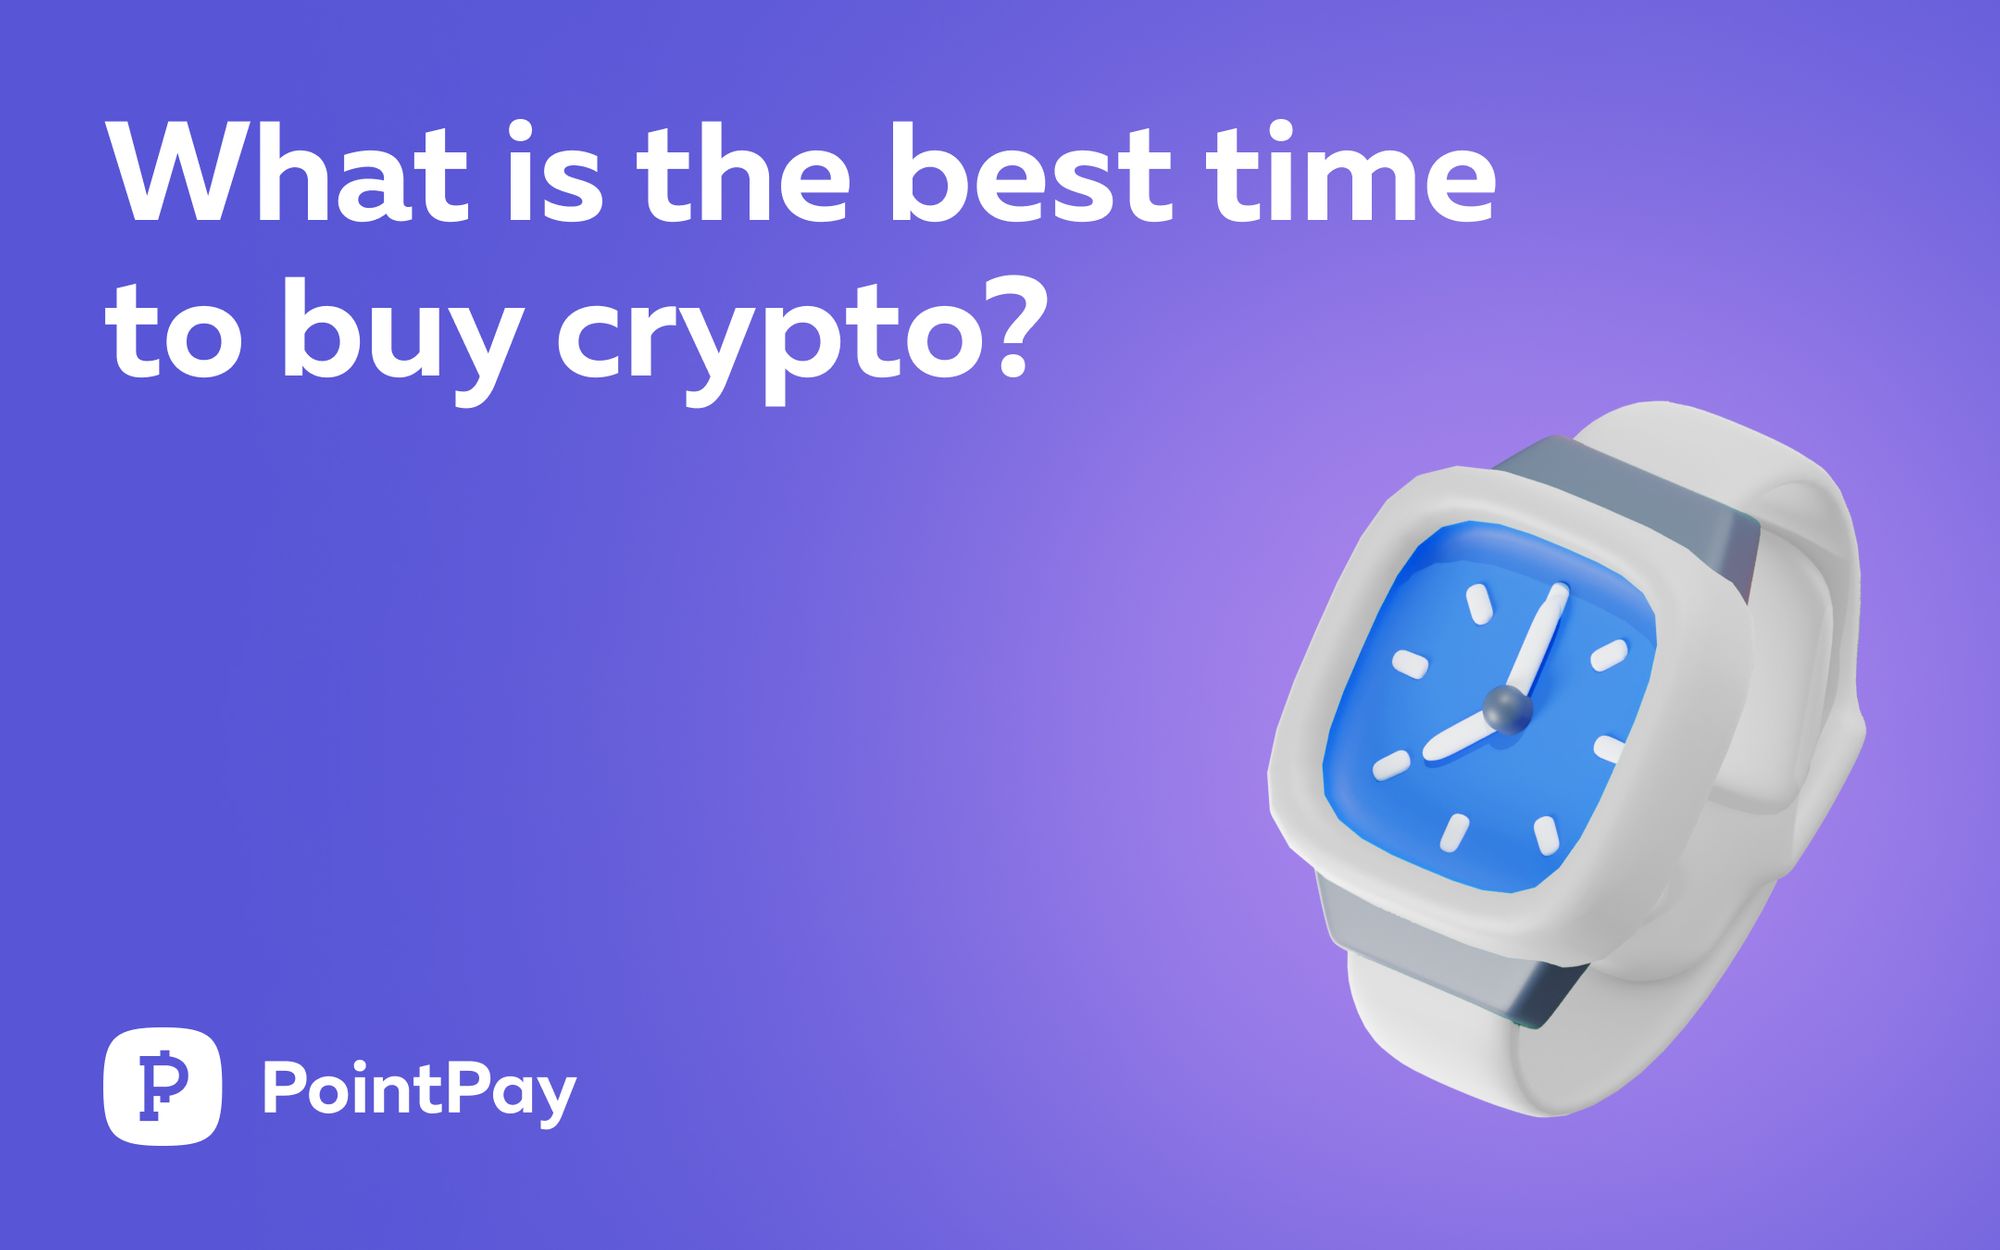 What is the best time of the day to buy cryptocurrency?